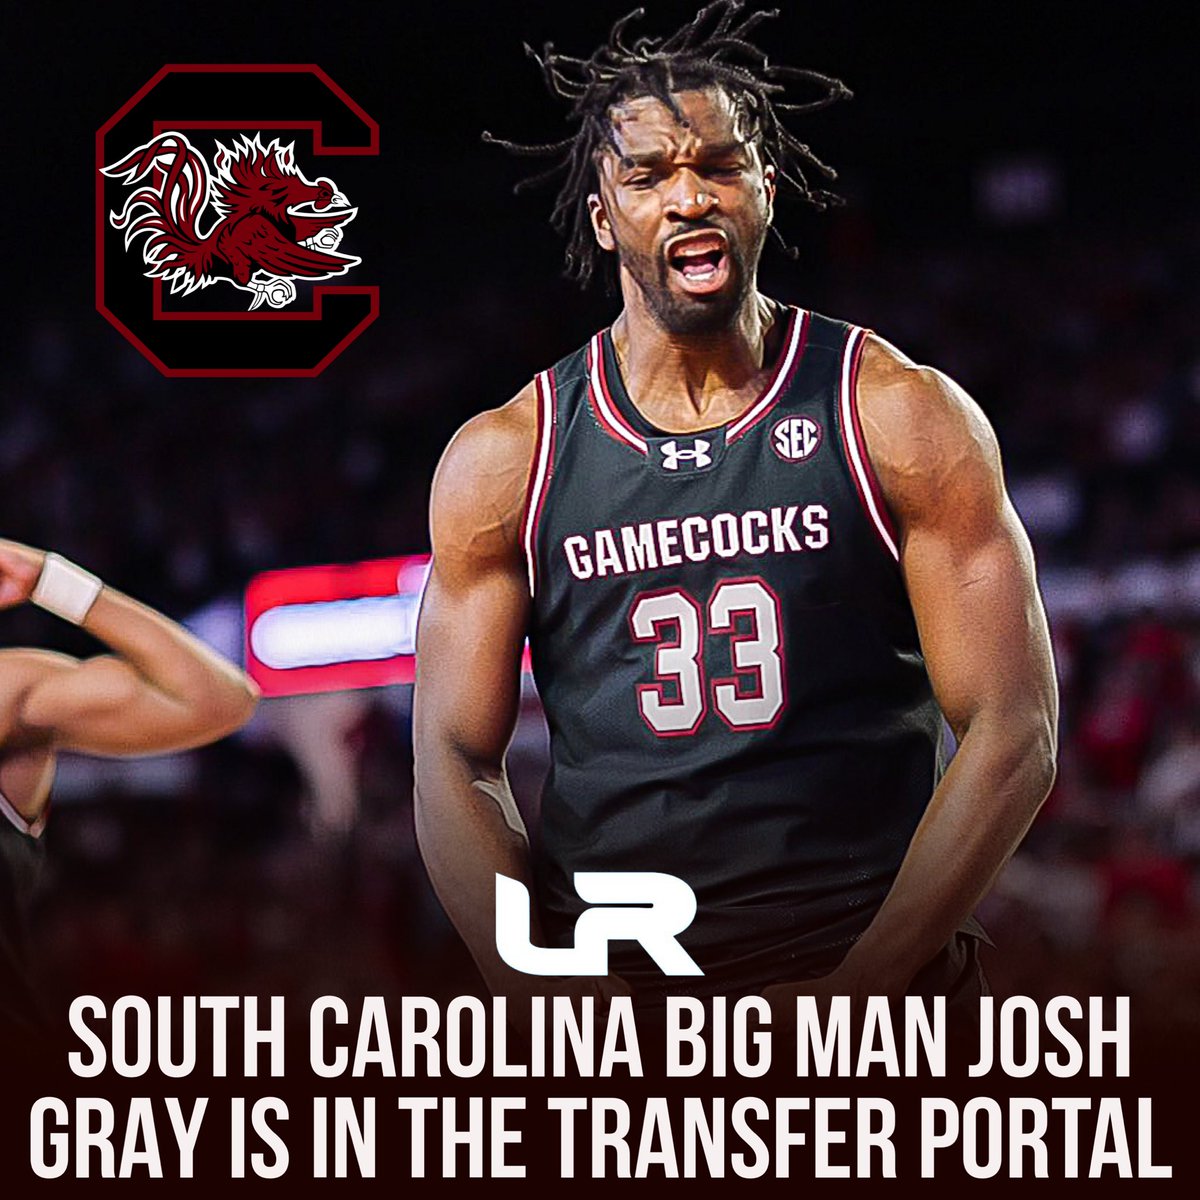 South Carolina transfer Josh Gray (@NWNBJosh) has heard from these schools since going portaling, a source tells @LeagueRDY: Missouri Mississippi State Temple UMass FAU St. Joseph’s UTSA Western Kentucky Mount Saint Mary’s Florida A&M He averaged 3.2PPG and 2.8RPG in only…